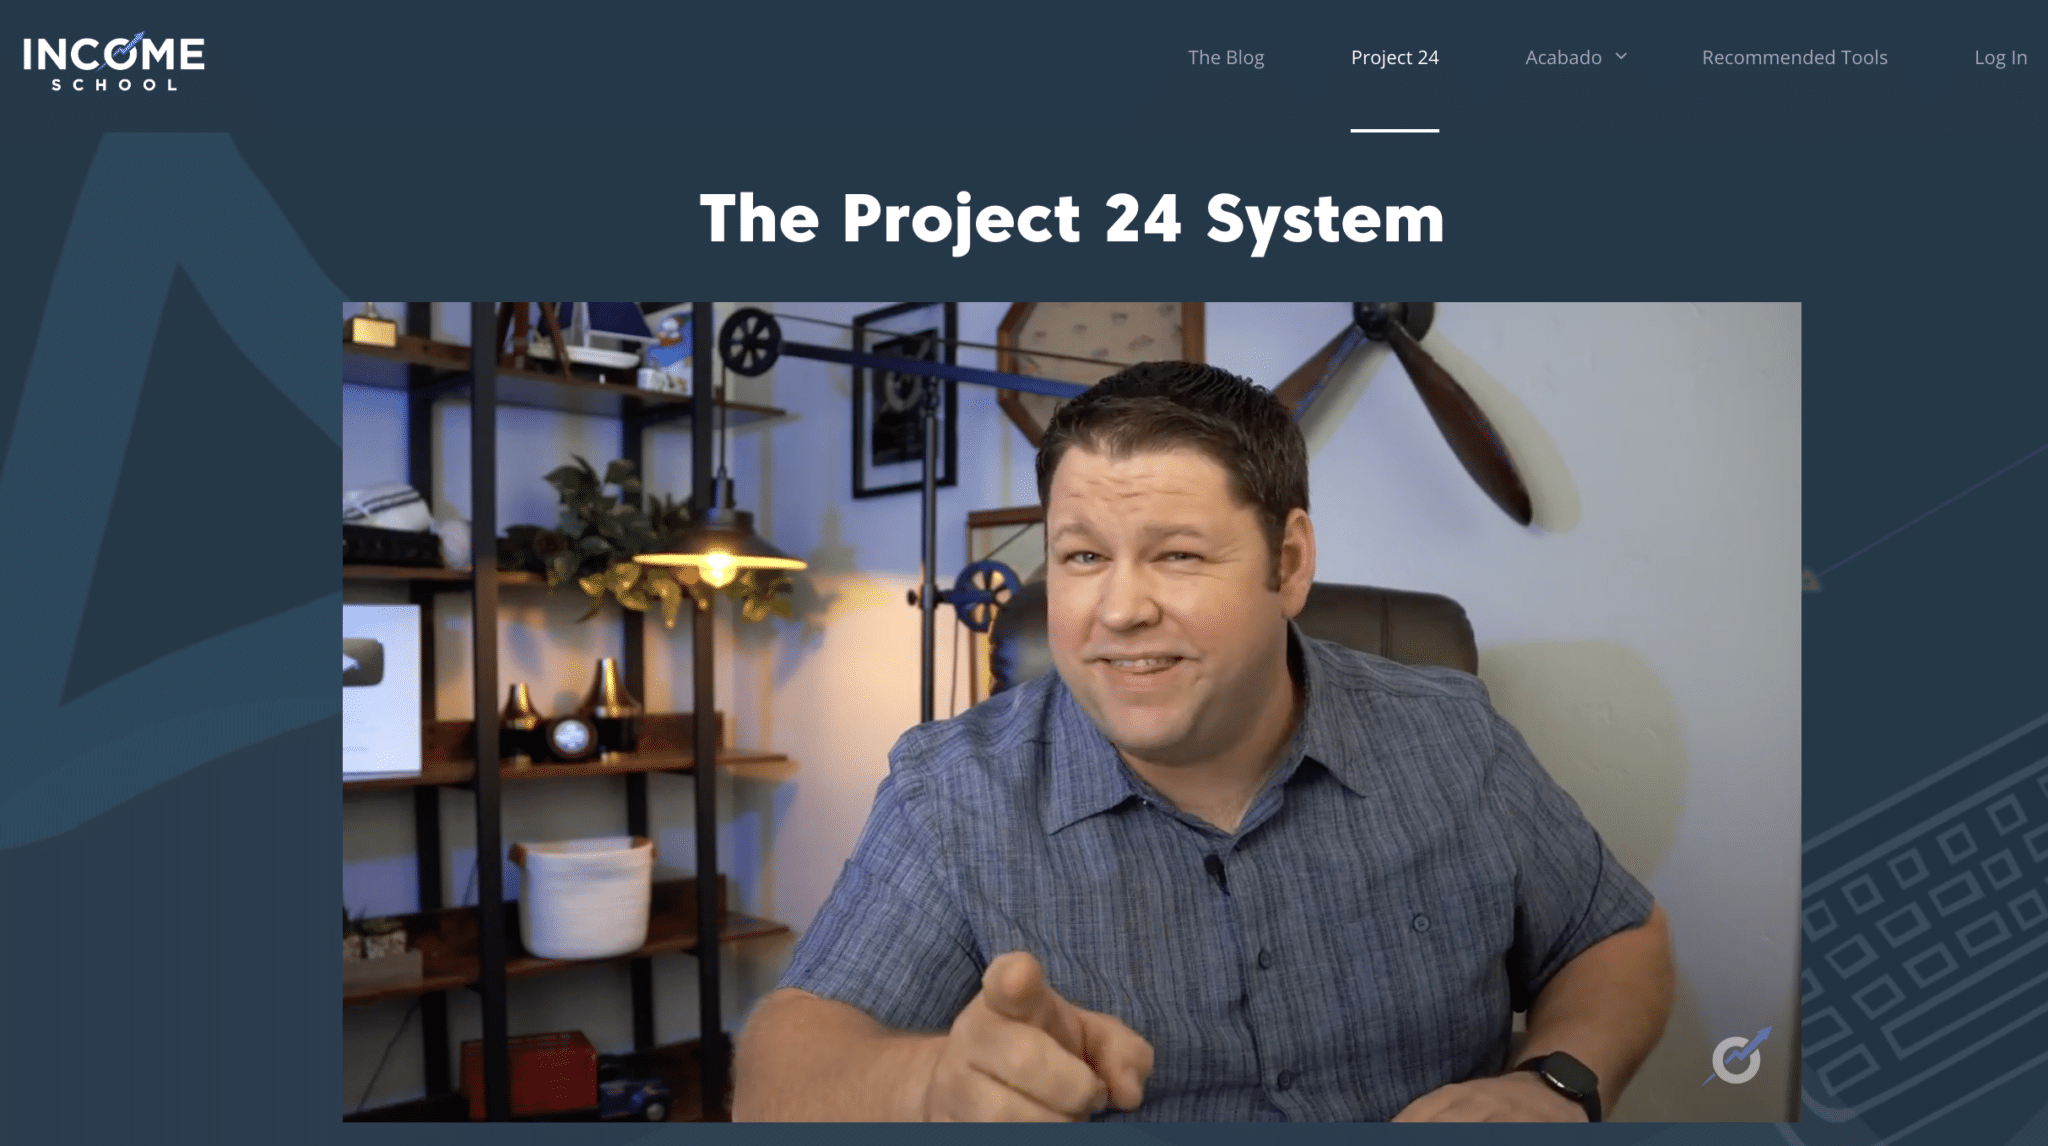 Project 24 By Income School